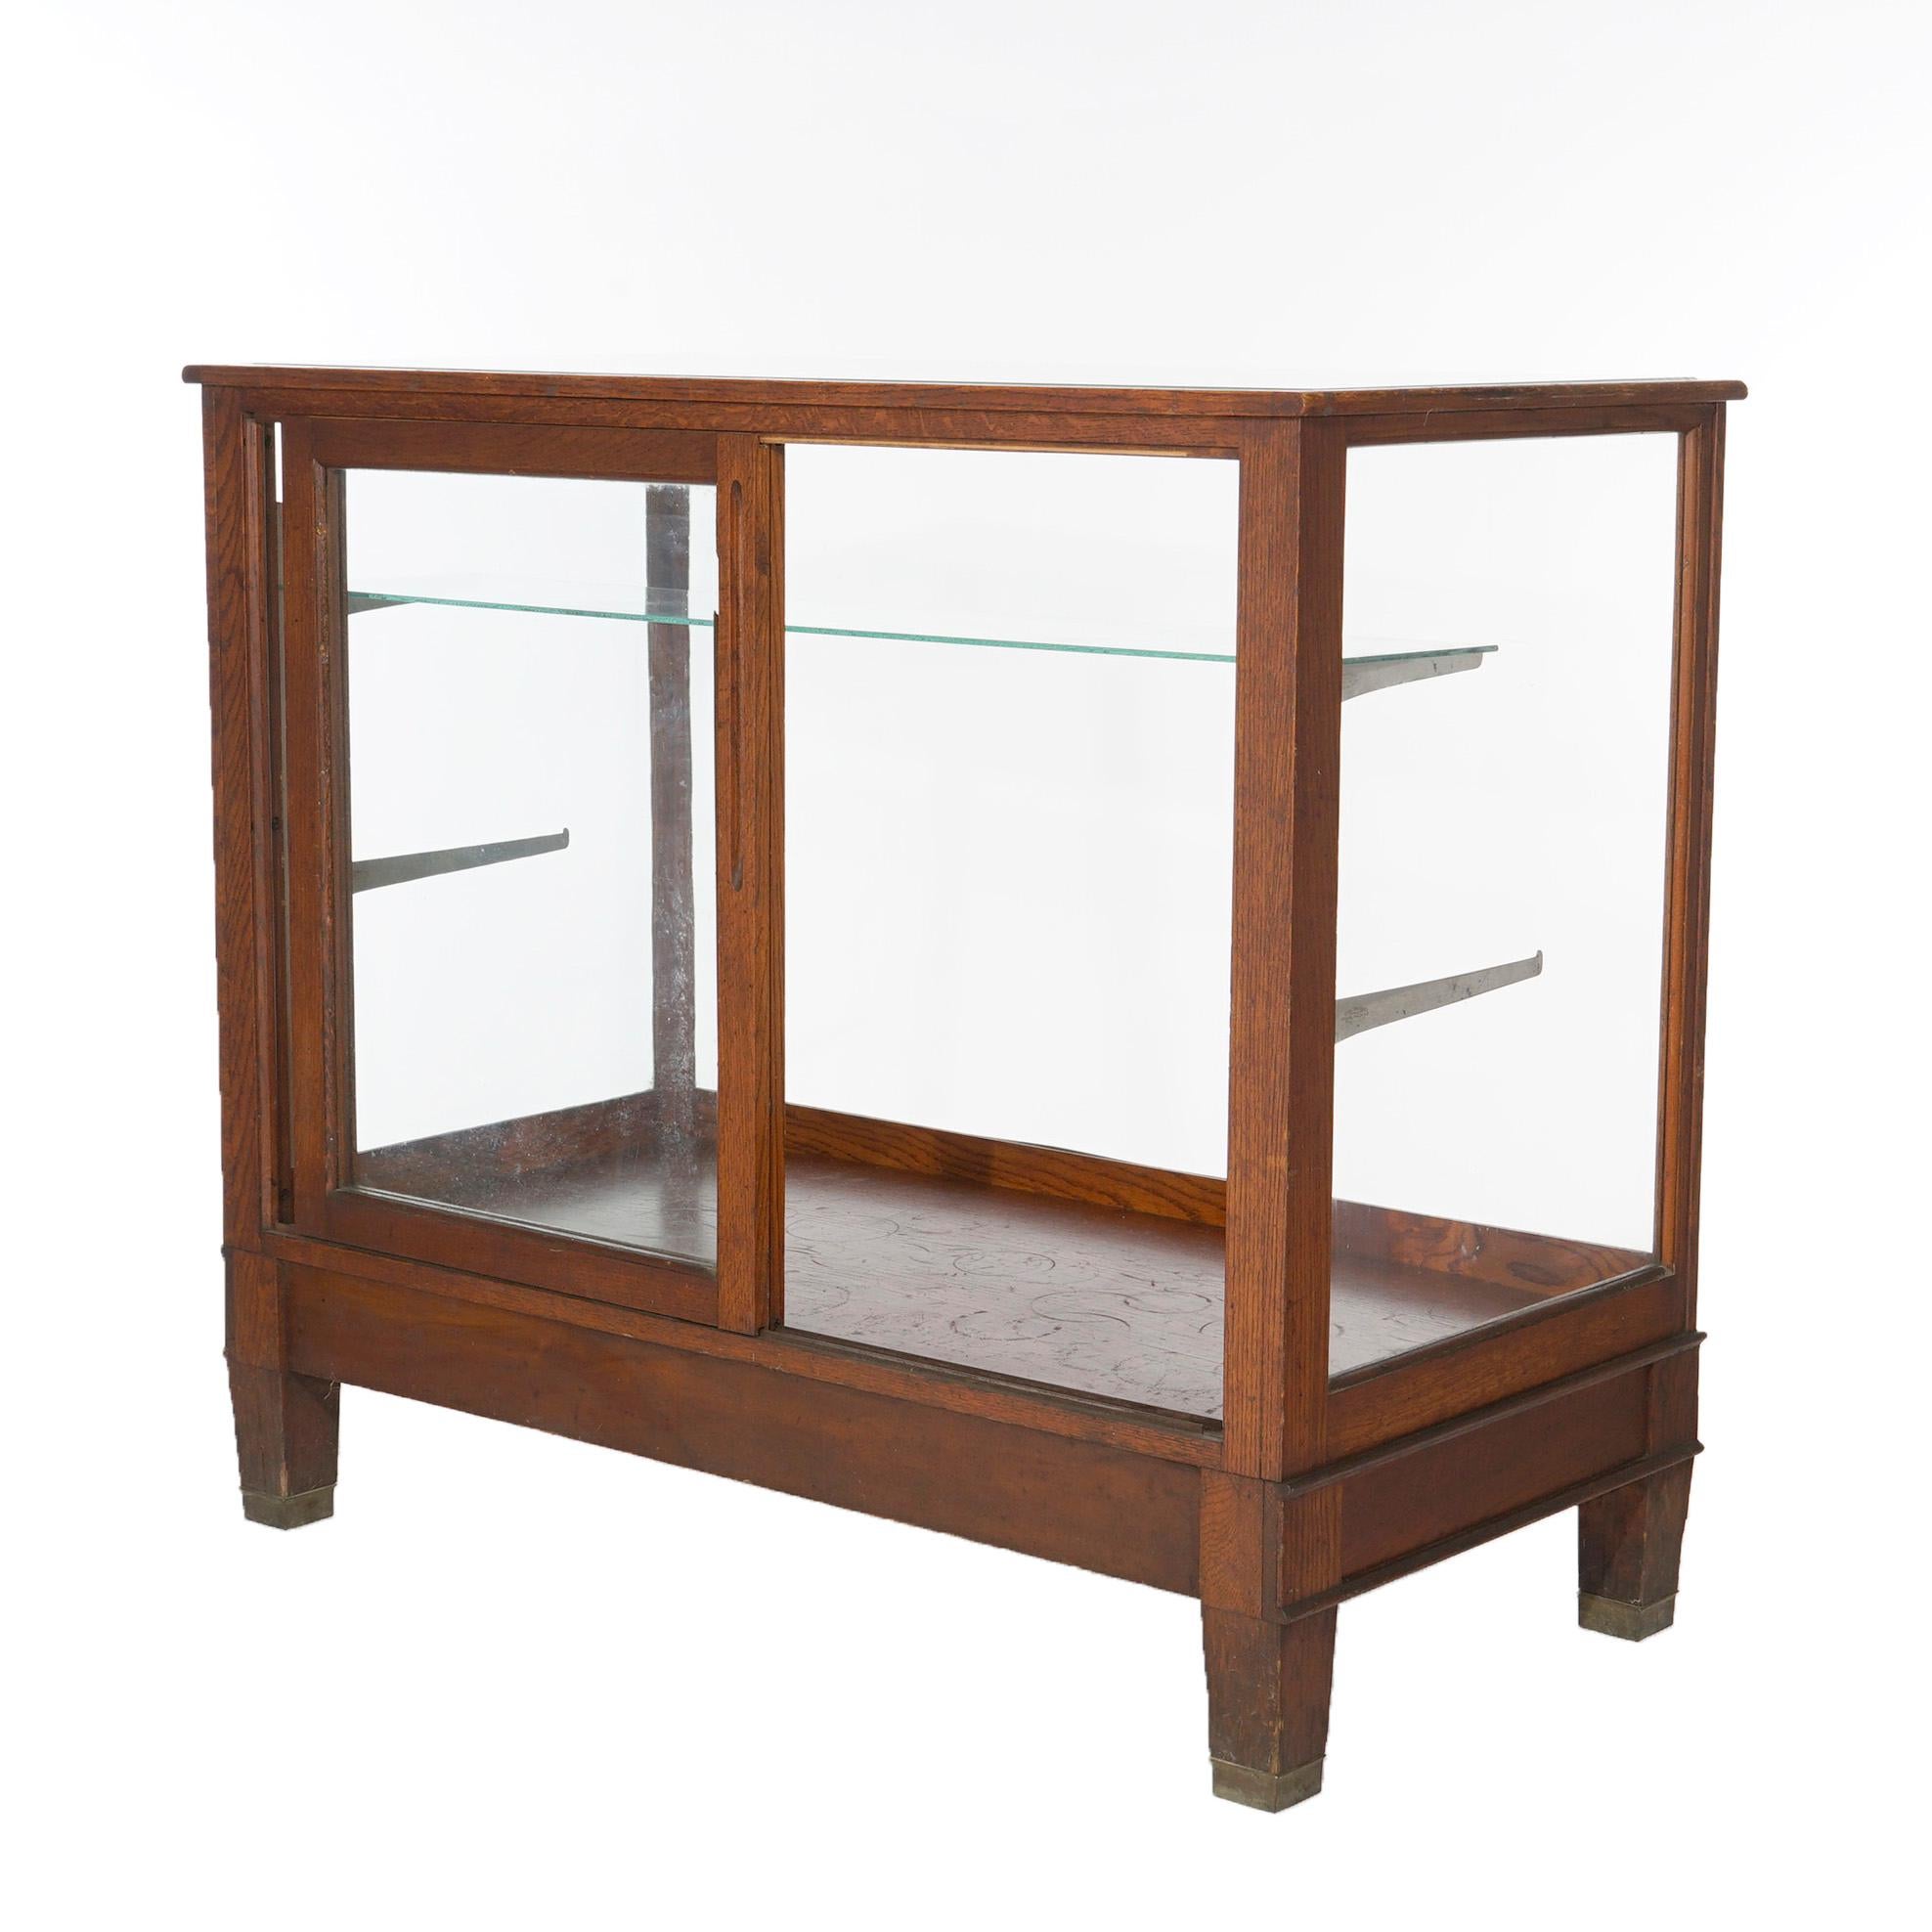 An antique Arts and Crafts country store counter display case offers oak frame with sliding doors opening to adjustable shelf interior, raise on square and tapered legs, c1900.

Measures- 40.25''H x 47.25''W x 24''D.